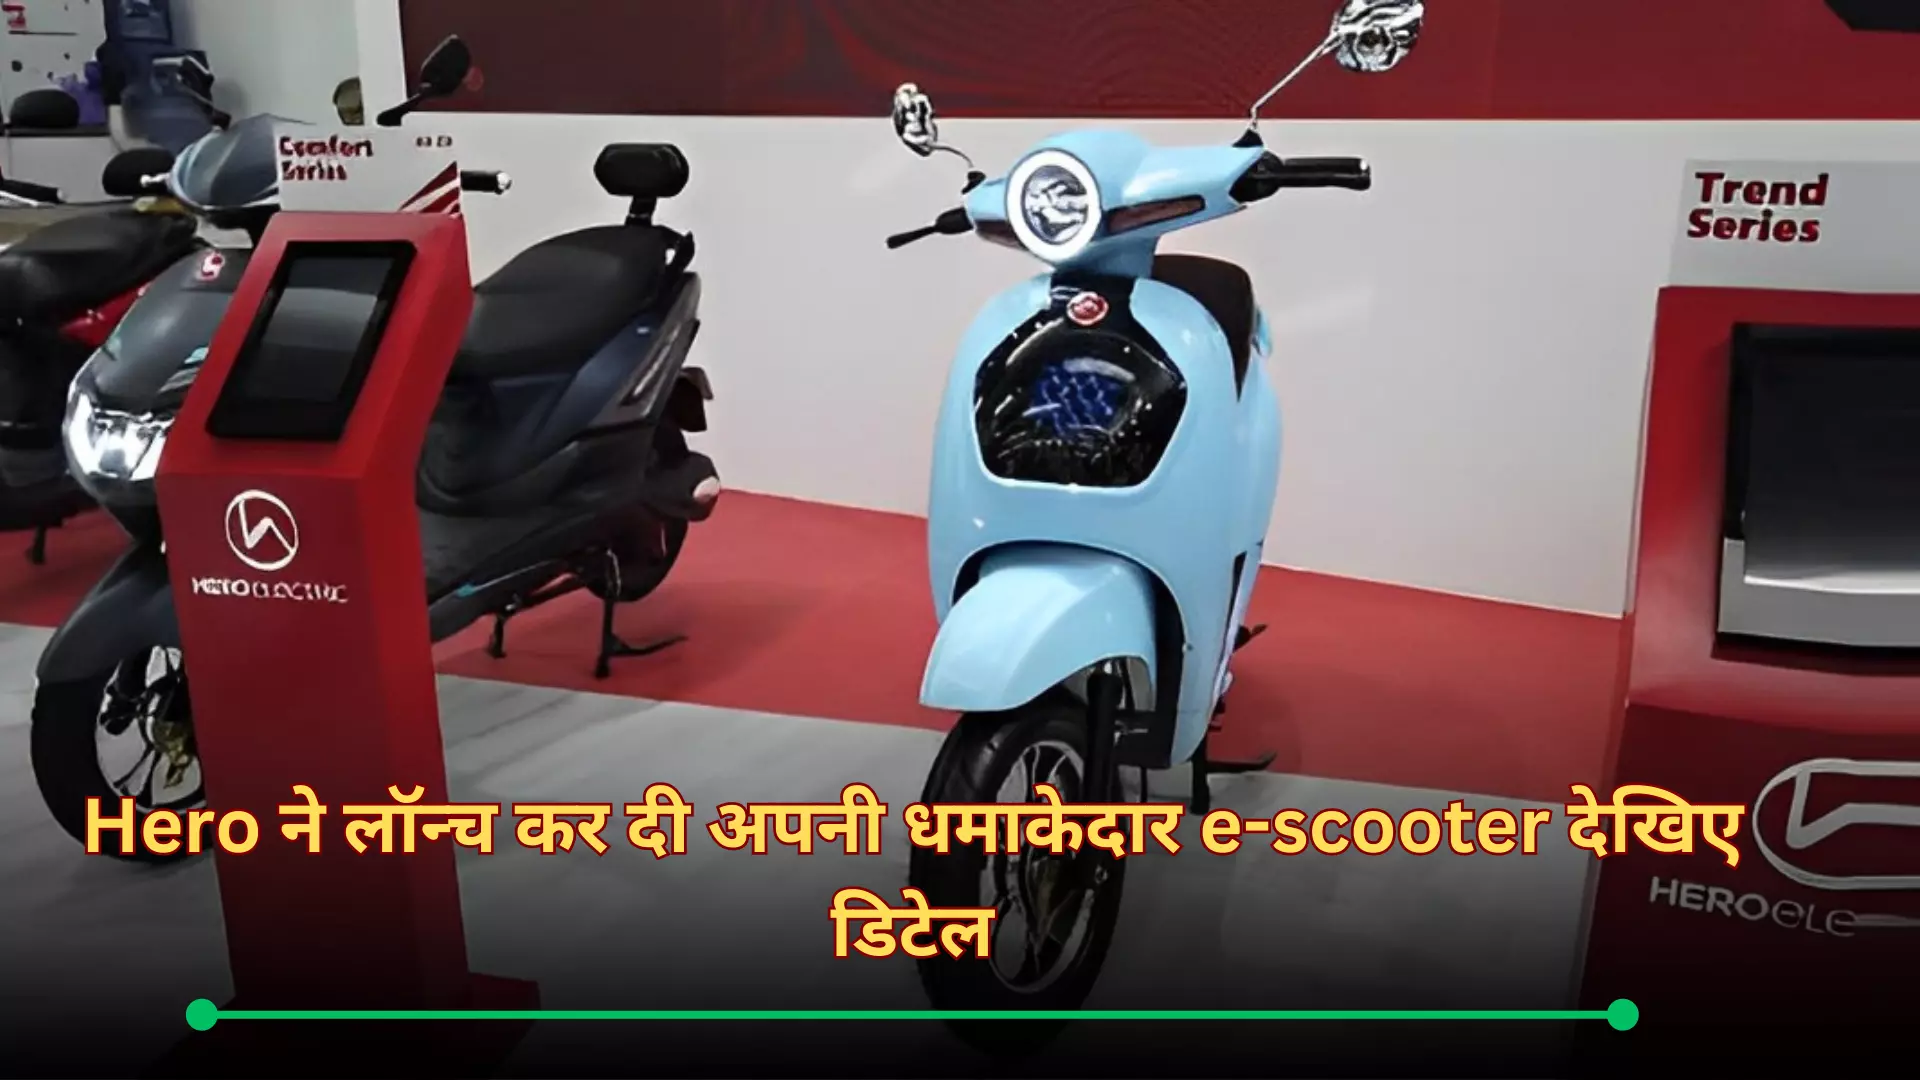 Hero AE-8 Electric Scooter